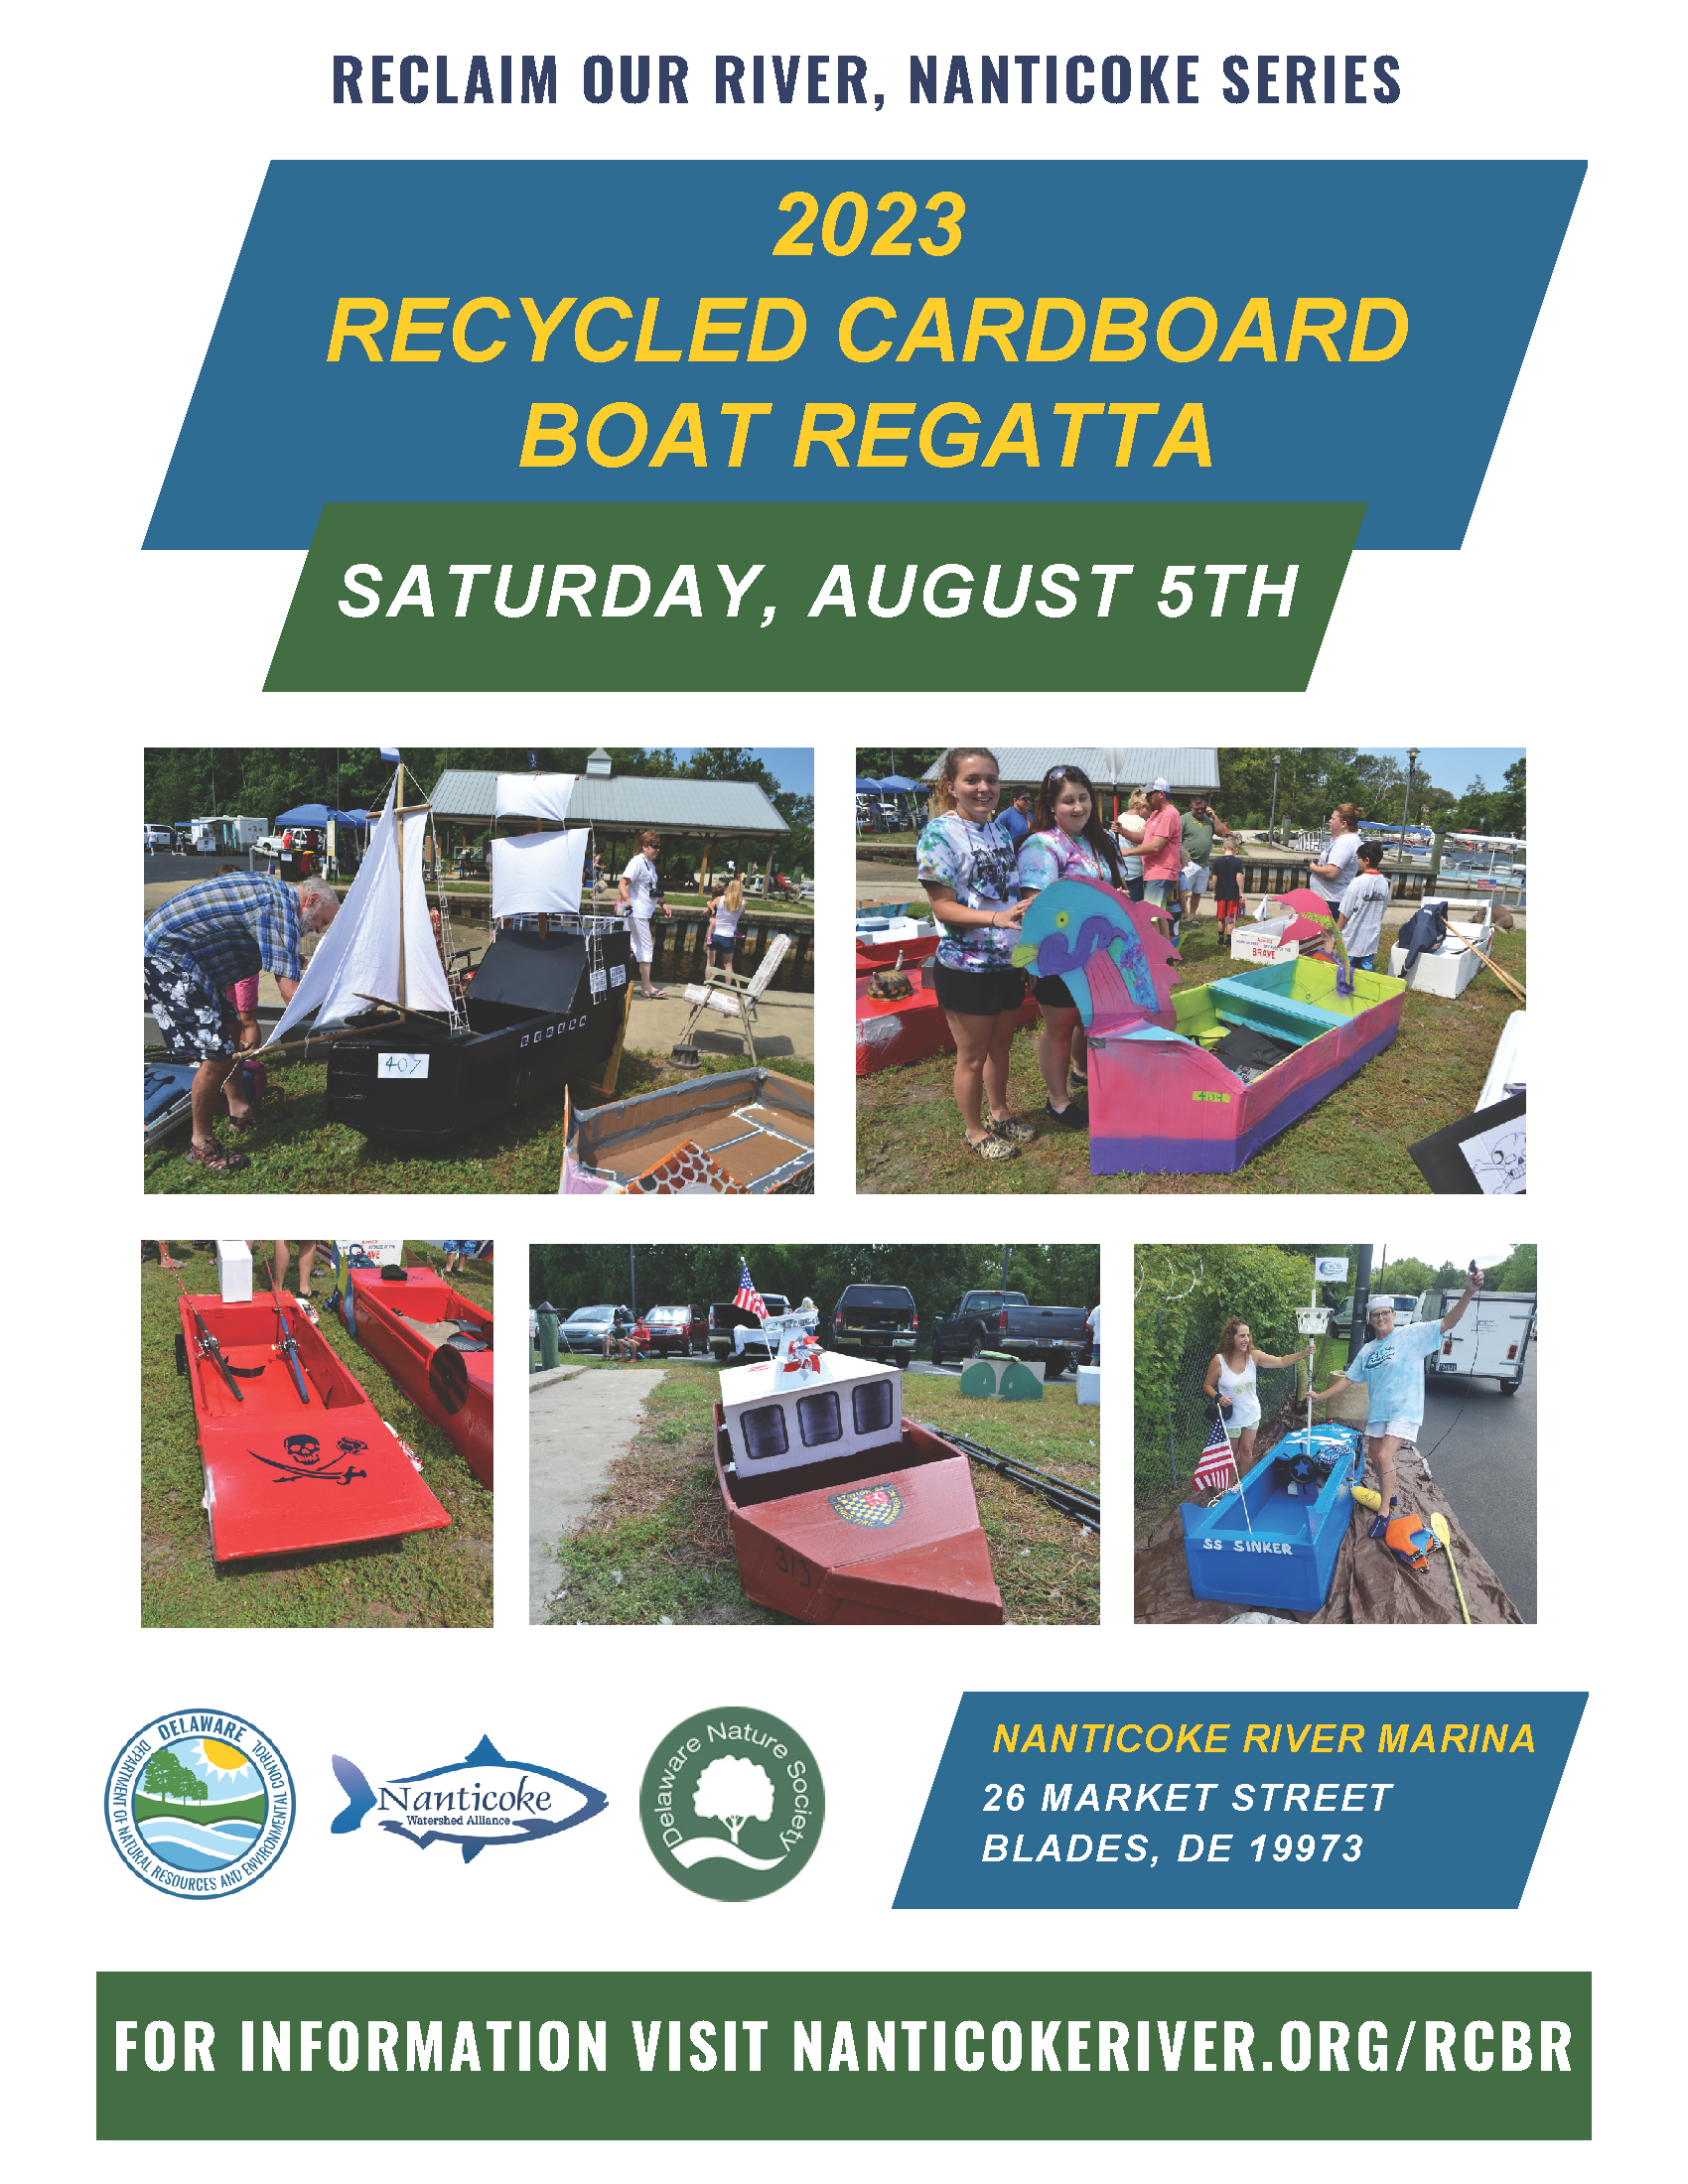 Register for the Recycled Cardboard Boat Regatta!